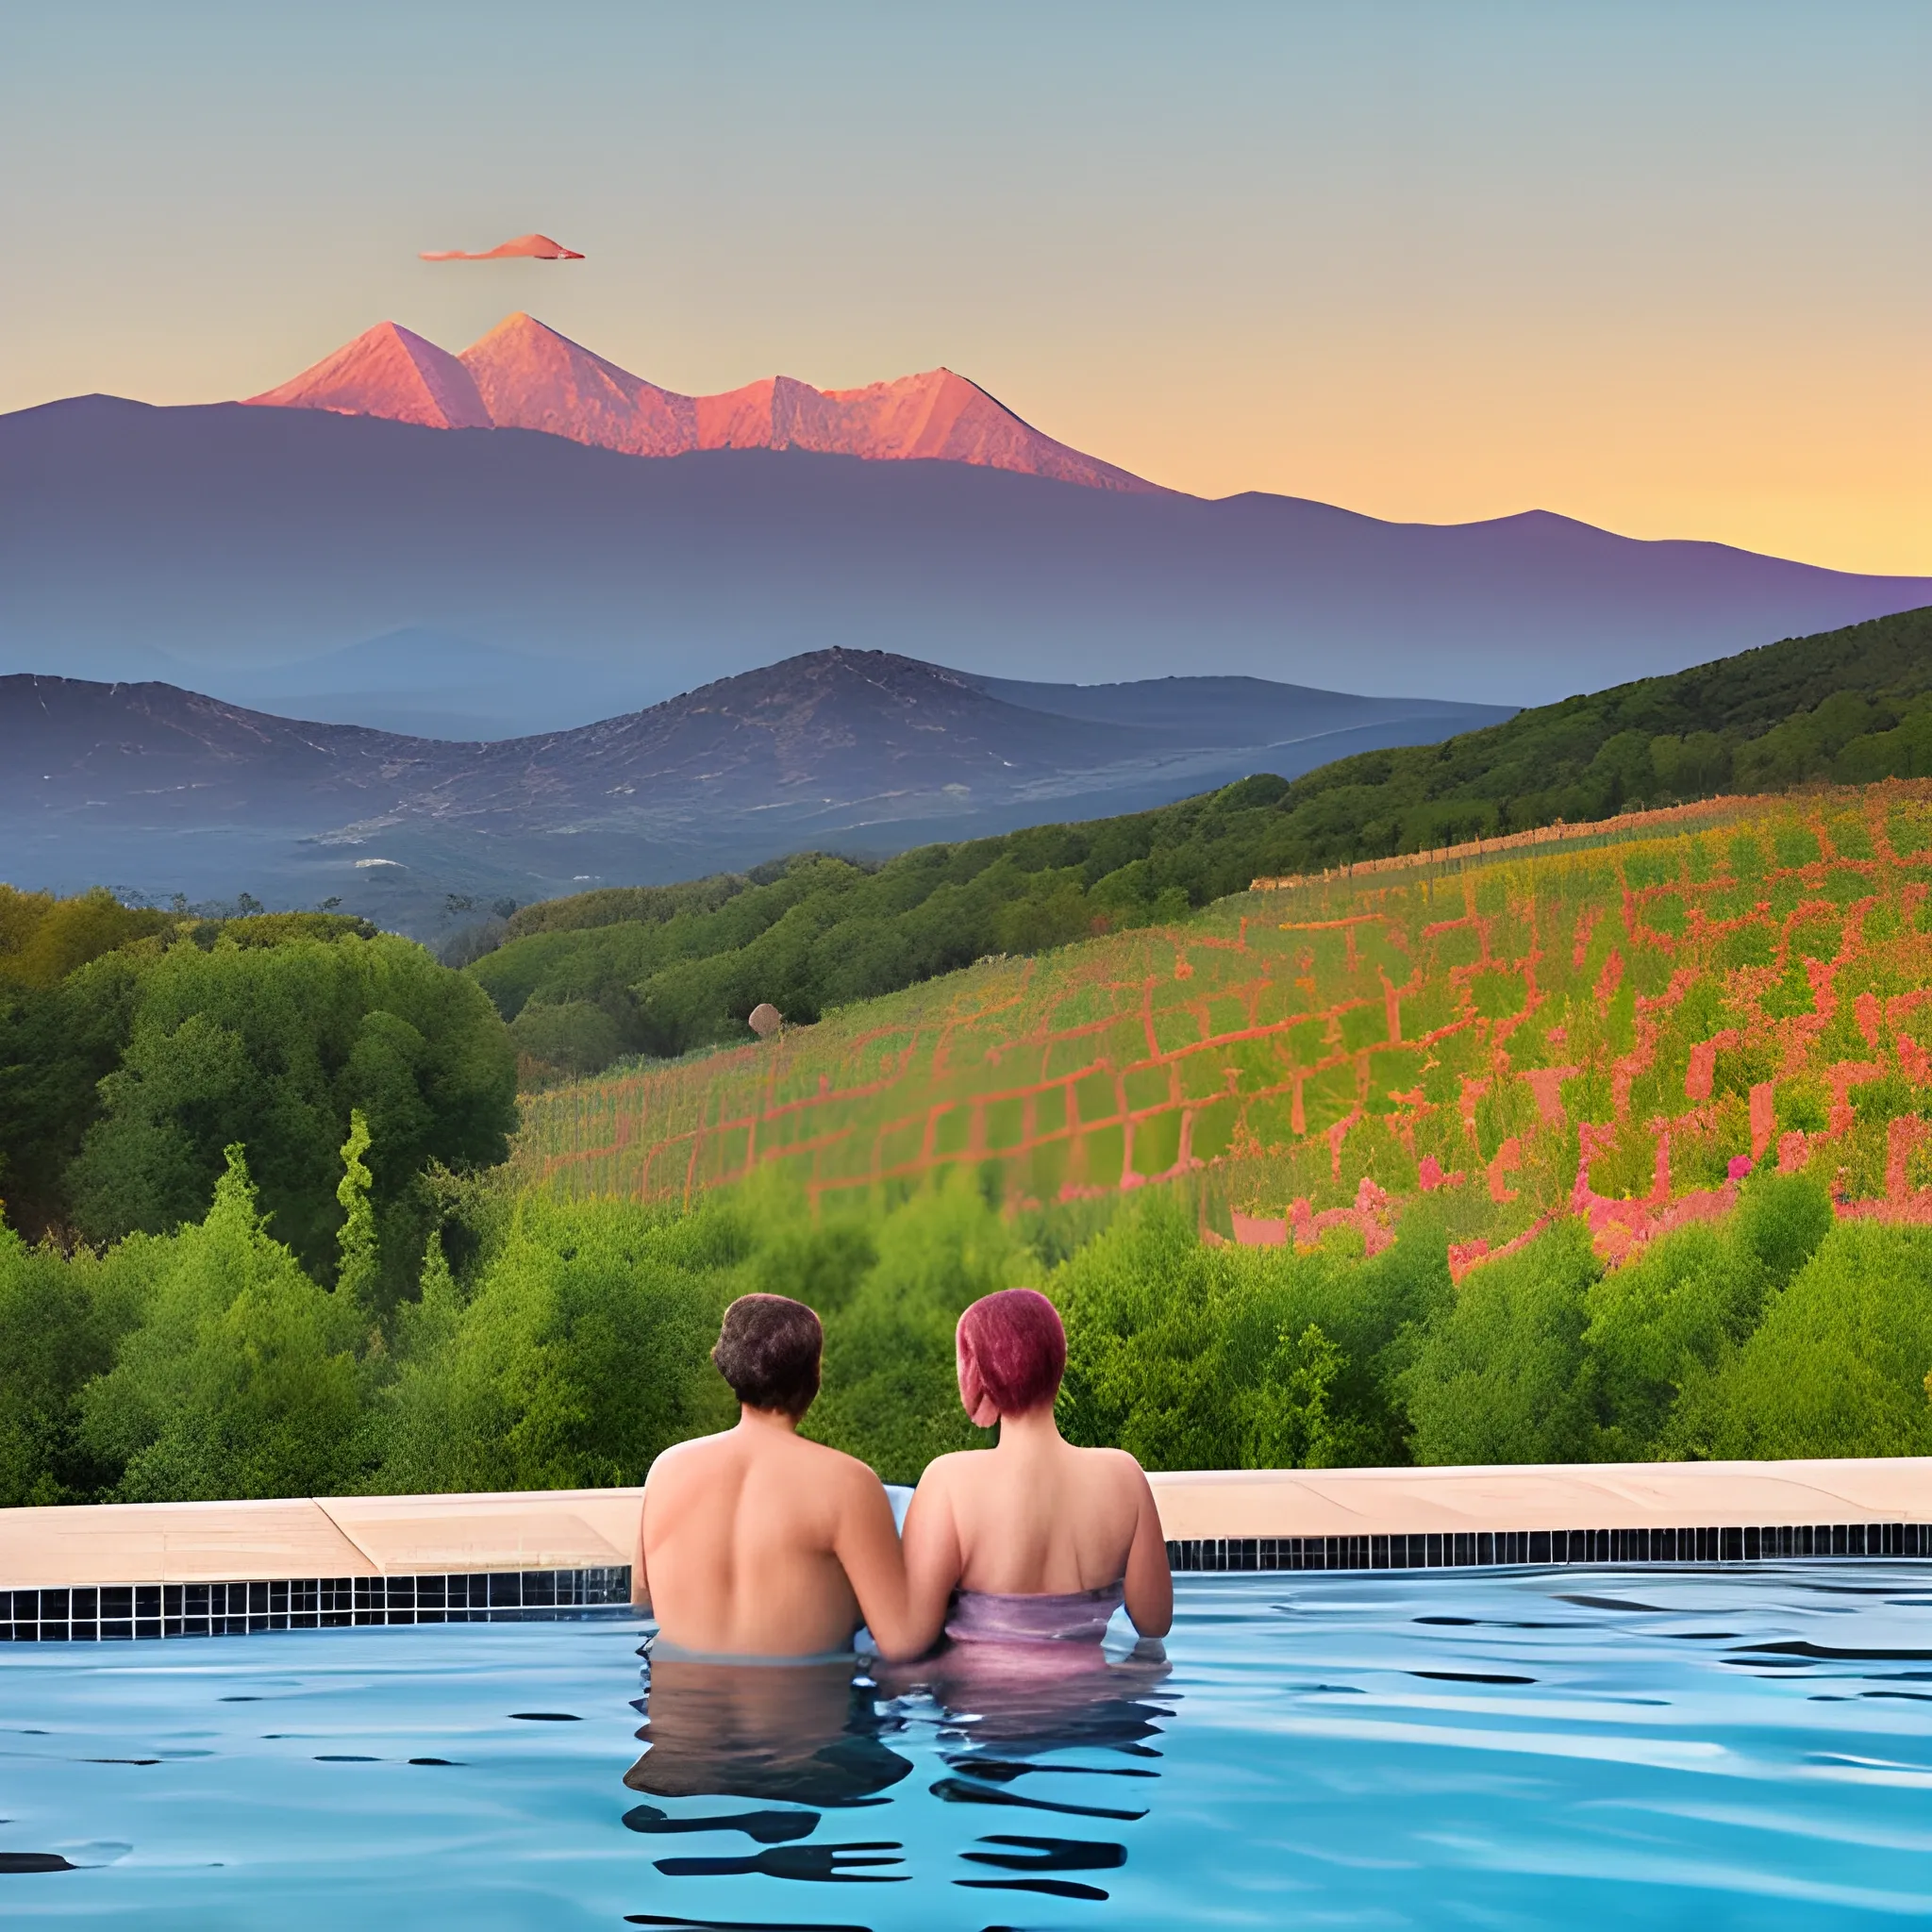 An awe-inspiring landscape showing the mount Canigou range with south france pigne forest in the  middleground and rolling hills in the background. In the foreground an old vineyard. The overall vibe should be adventurous and wanderlust-evoking, with warm tones of oranges and pink in the sky to convey a sunset or sunrise. A few birds soaring in the sky would add a touch of liveliness to the scene and a human couple swimming and gazing at the view from a pool on the foreground.
